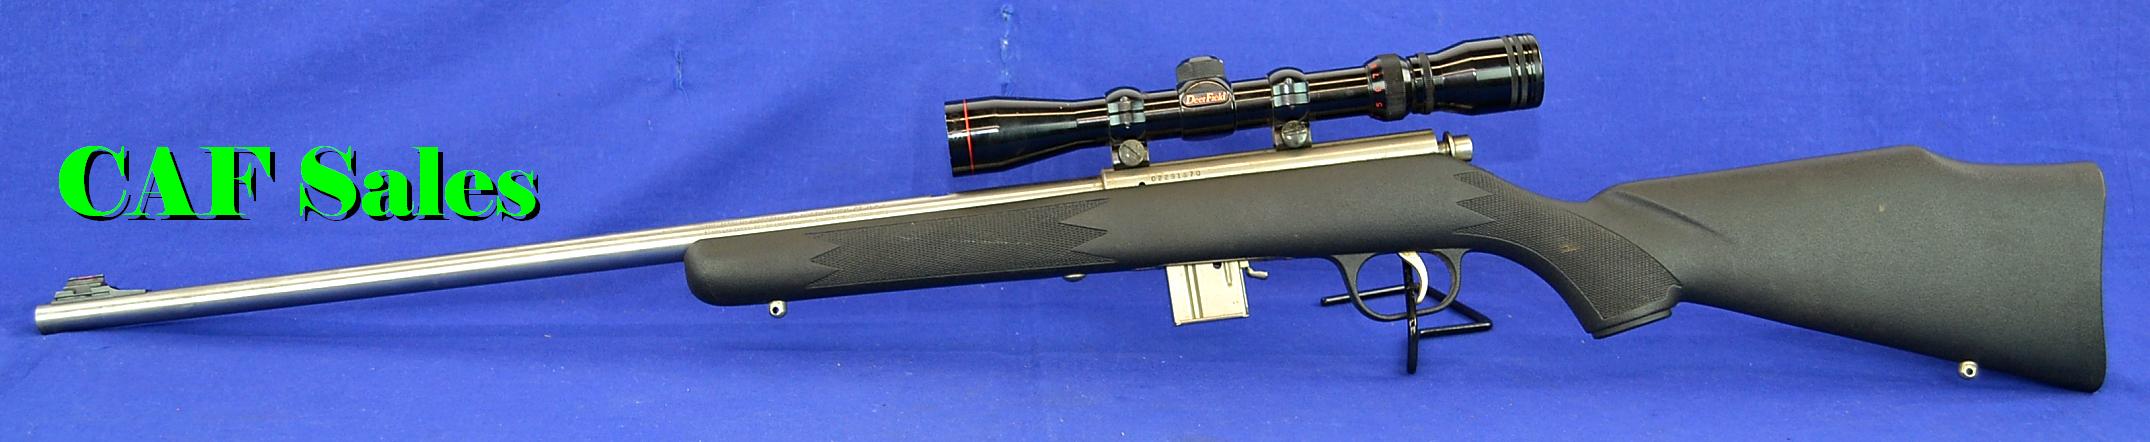 Marlin Model 882 Ss 22 Wmr Bolt Action Rifle For Sale At